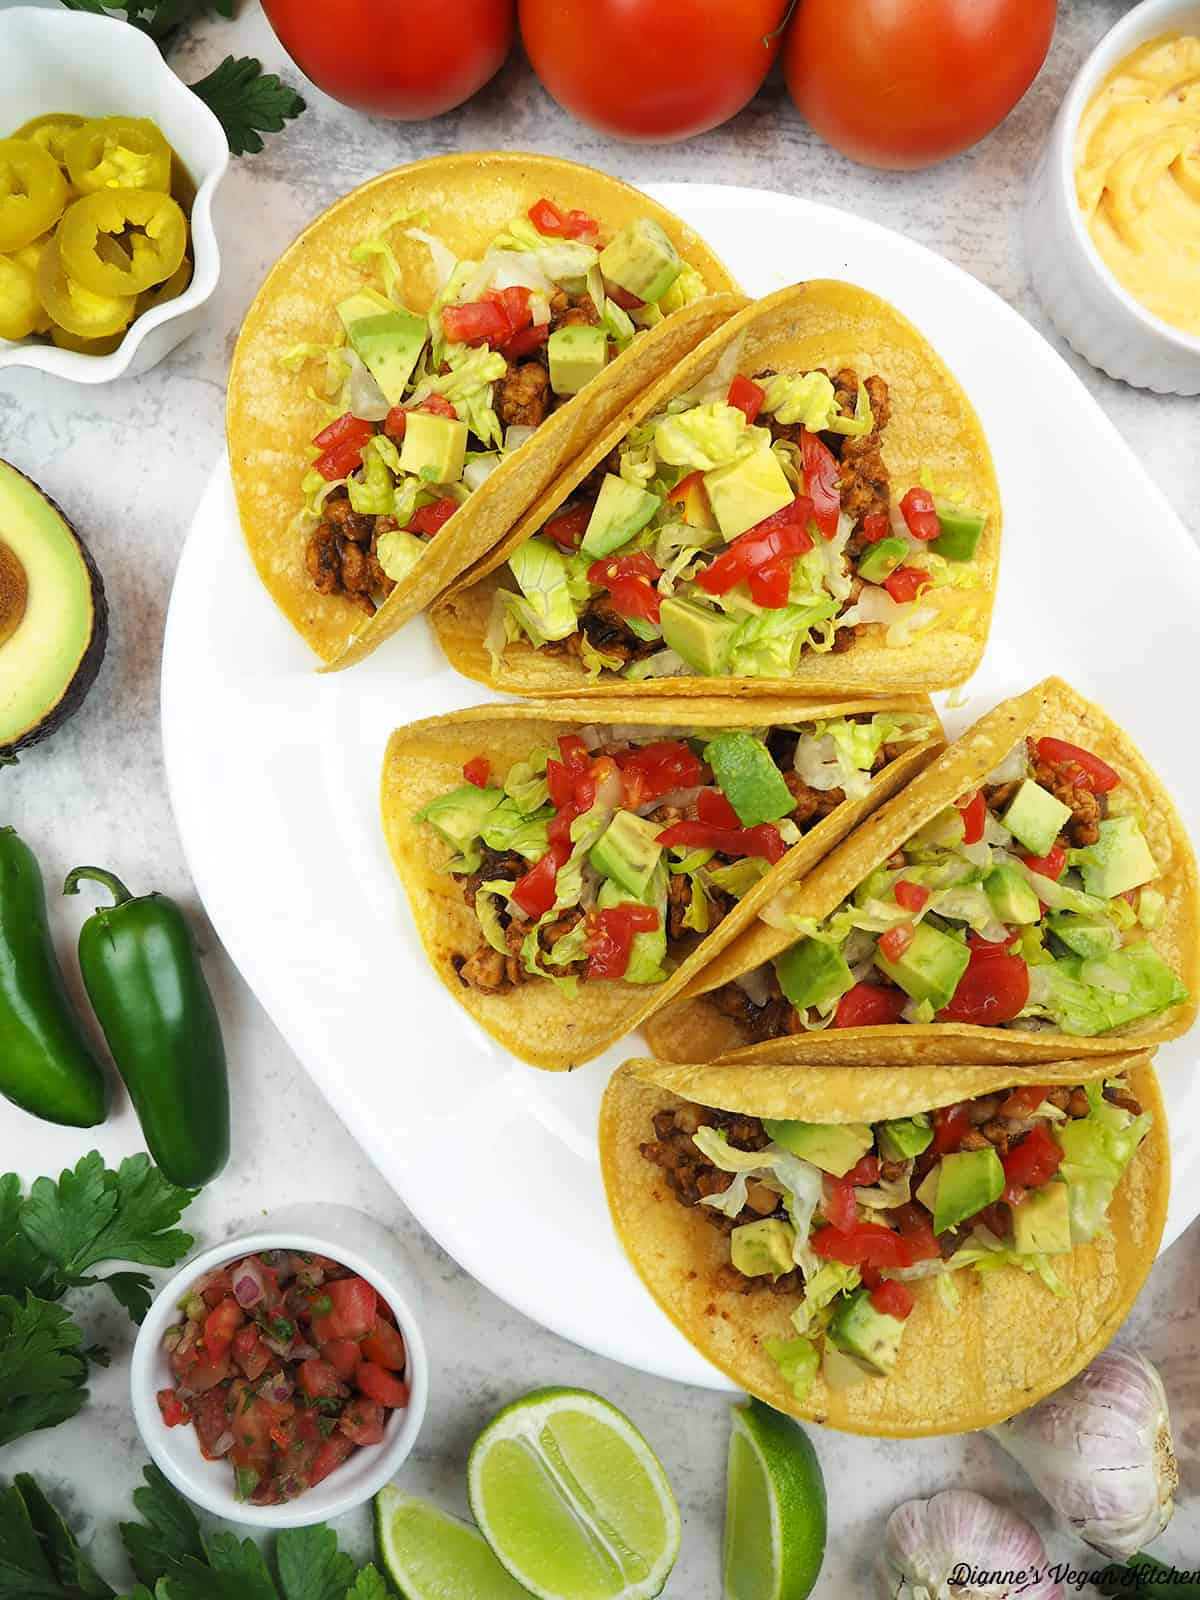 tacos on platter with jalapeños, tomatoes, avocado, salsa, limes, garlic, and cheese sauce